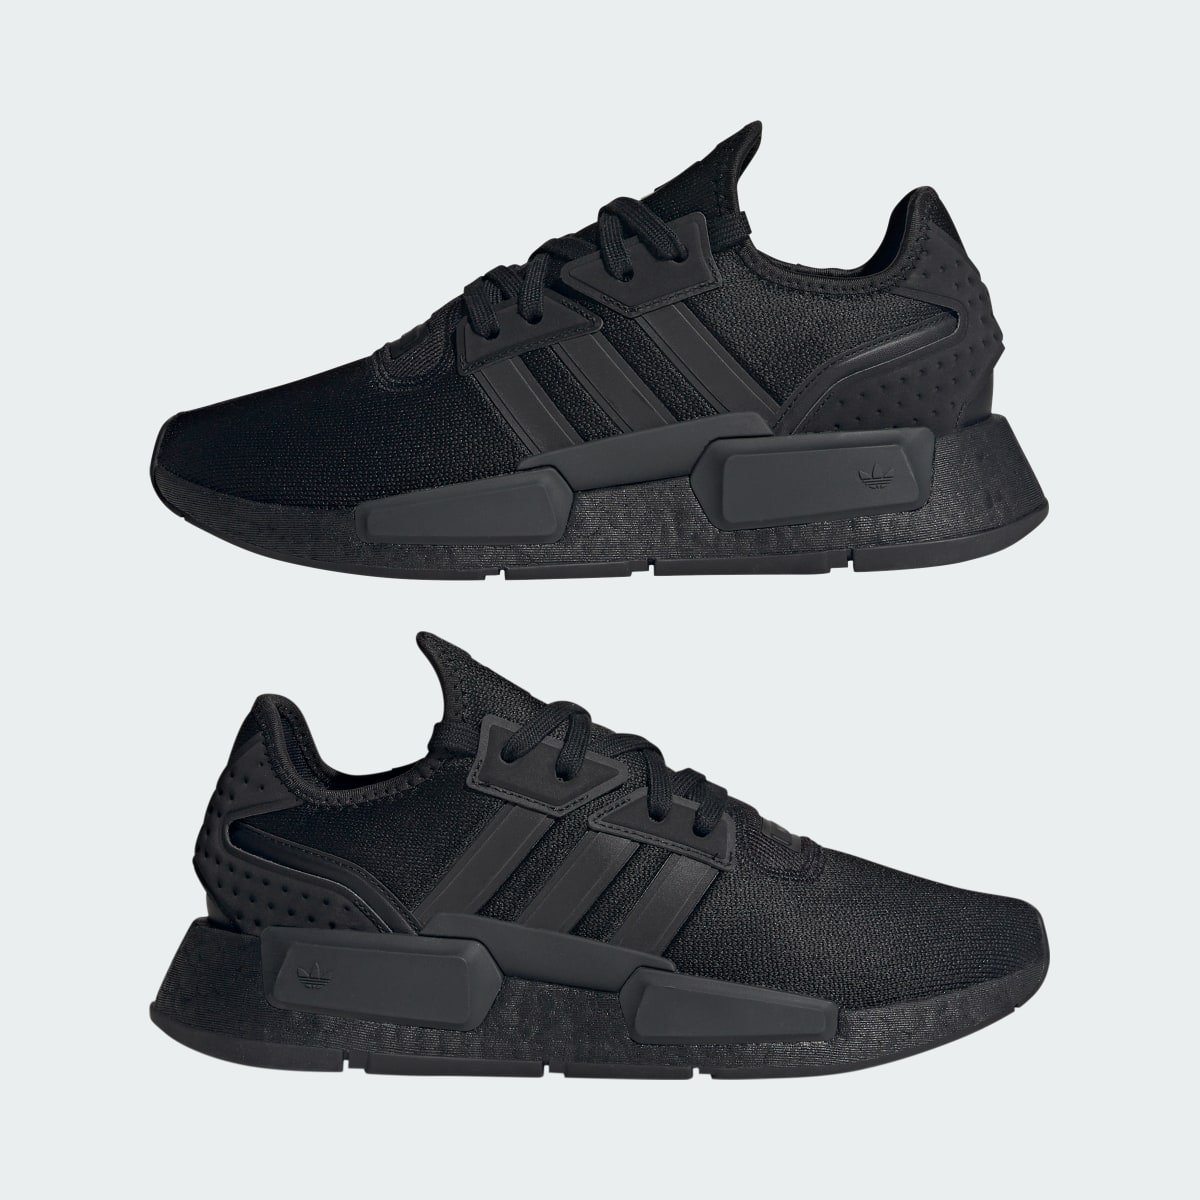 Adidas NMD_G1 Shoes. 14